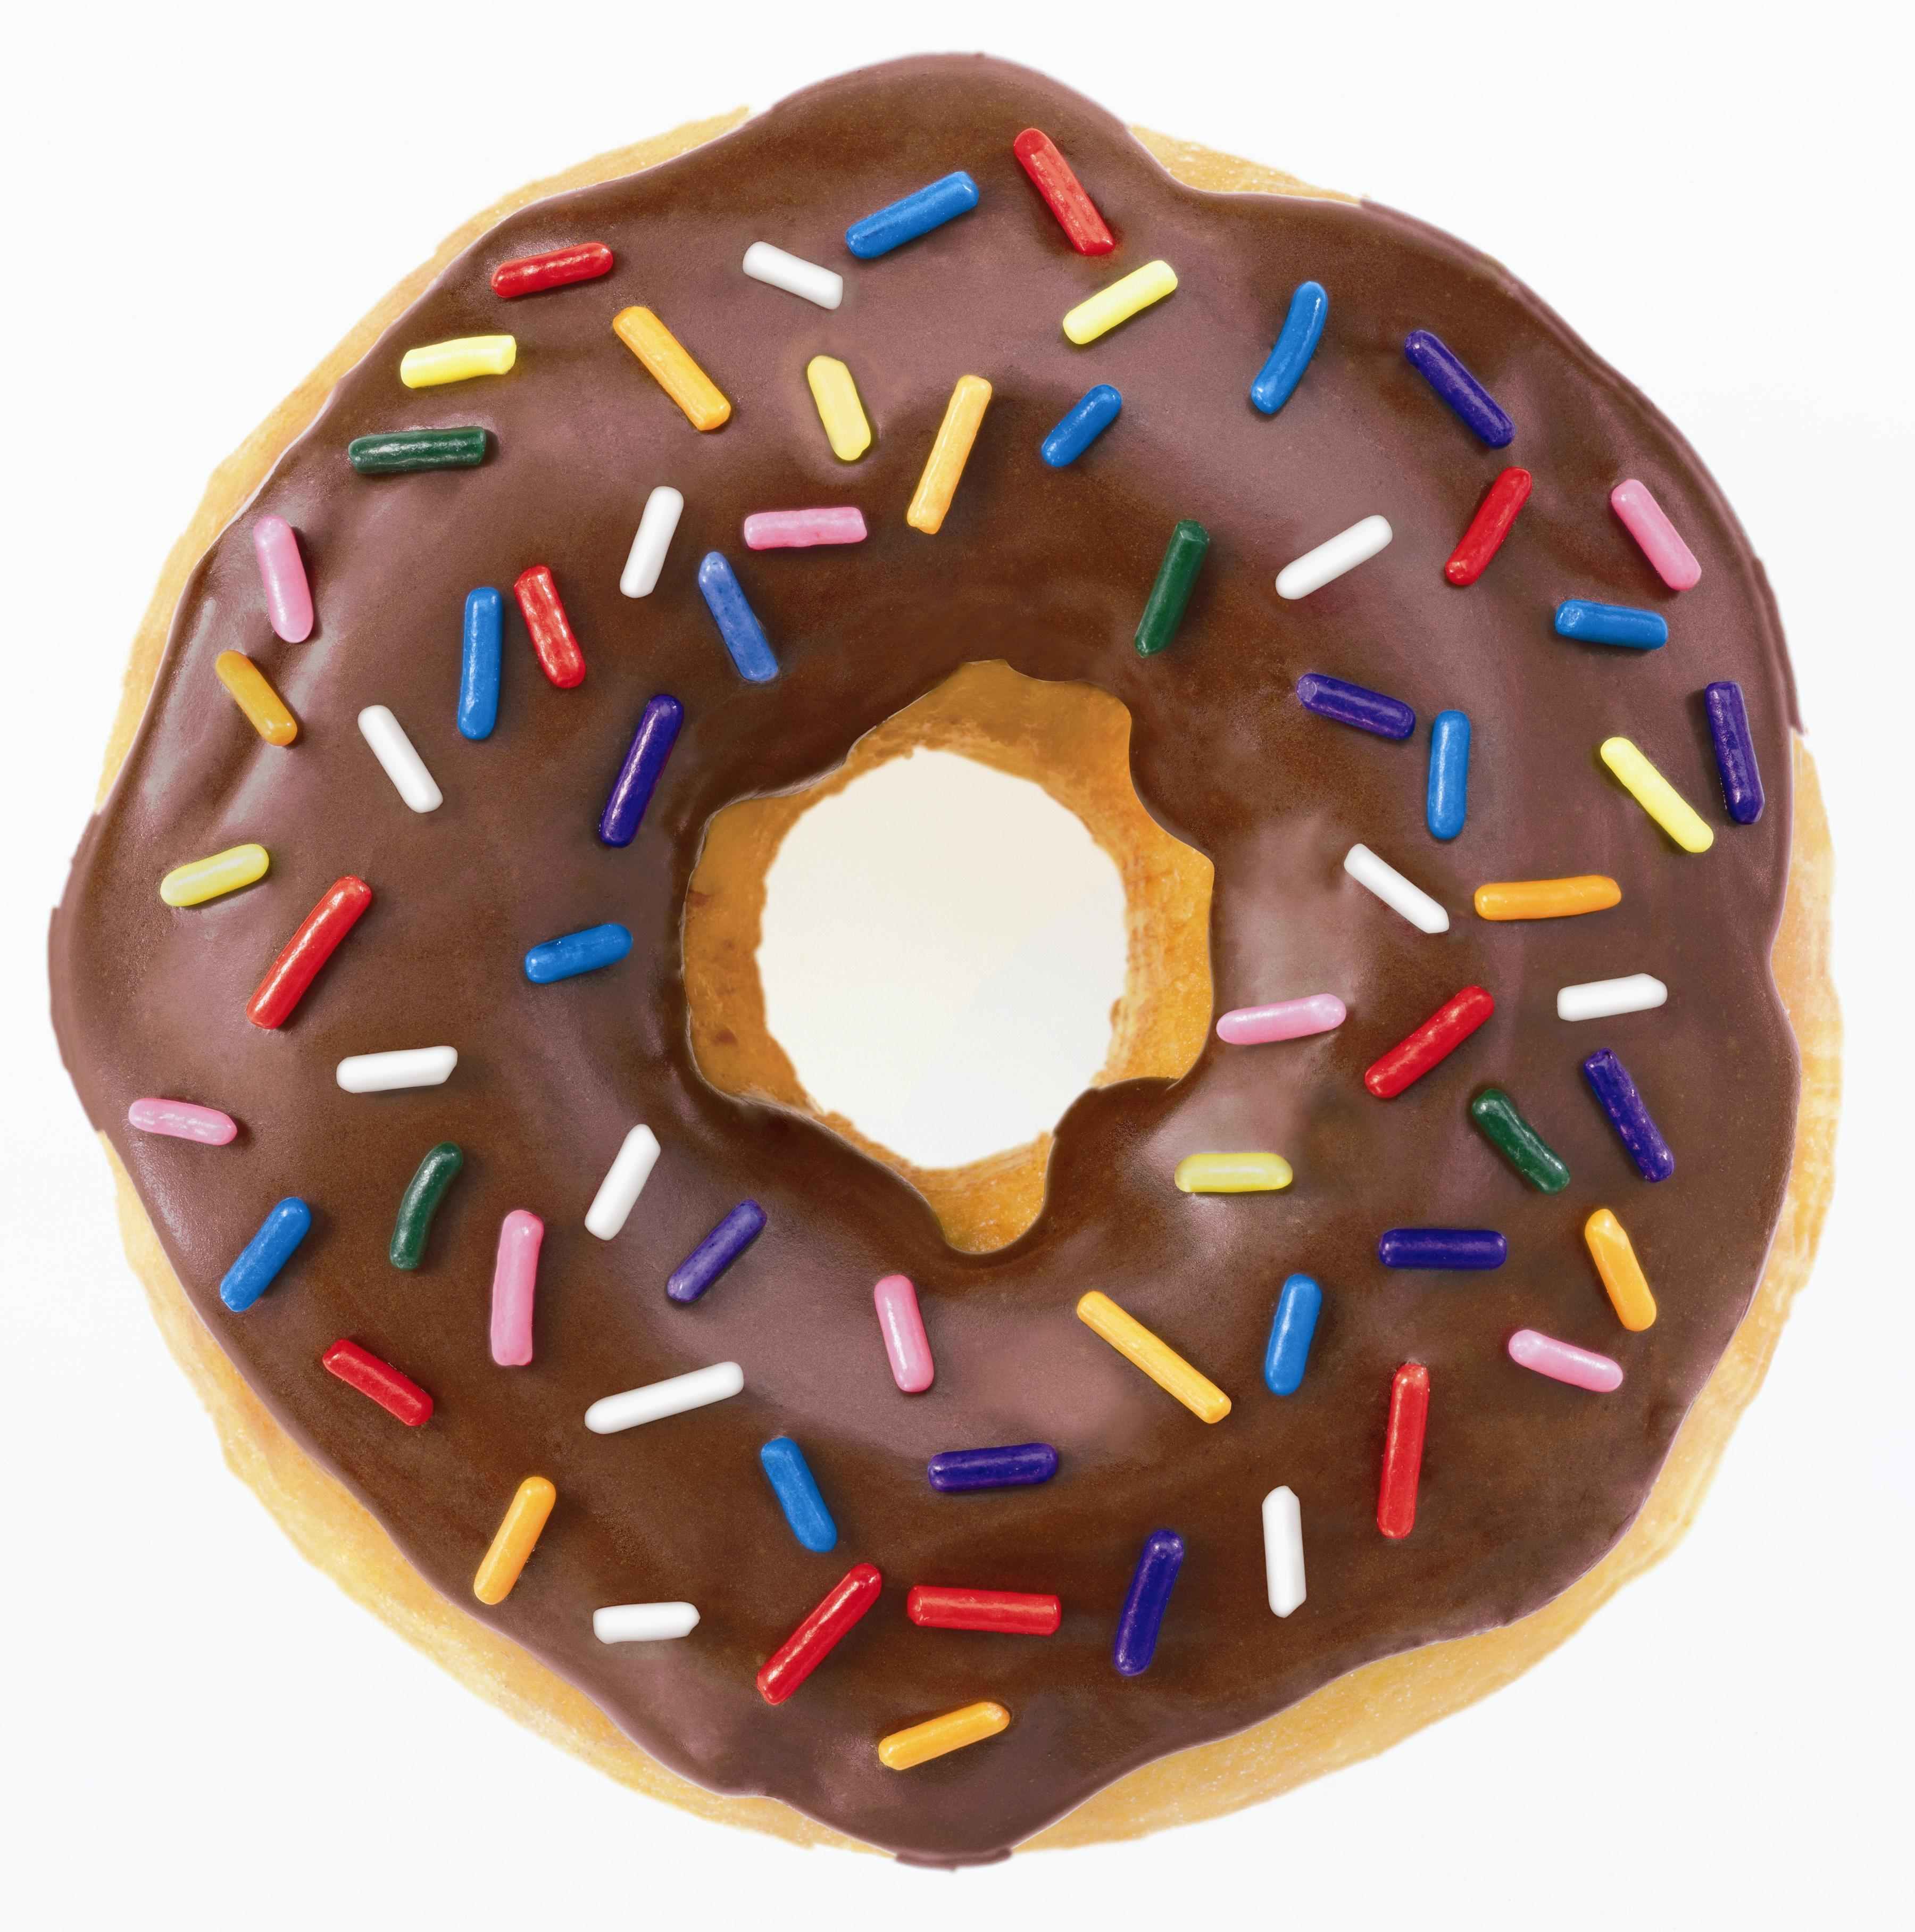 Choco Donut   Free Images At Clker Com   Vector Clip Art Online